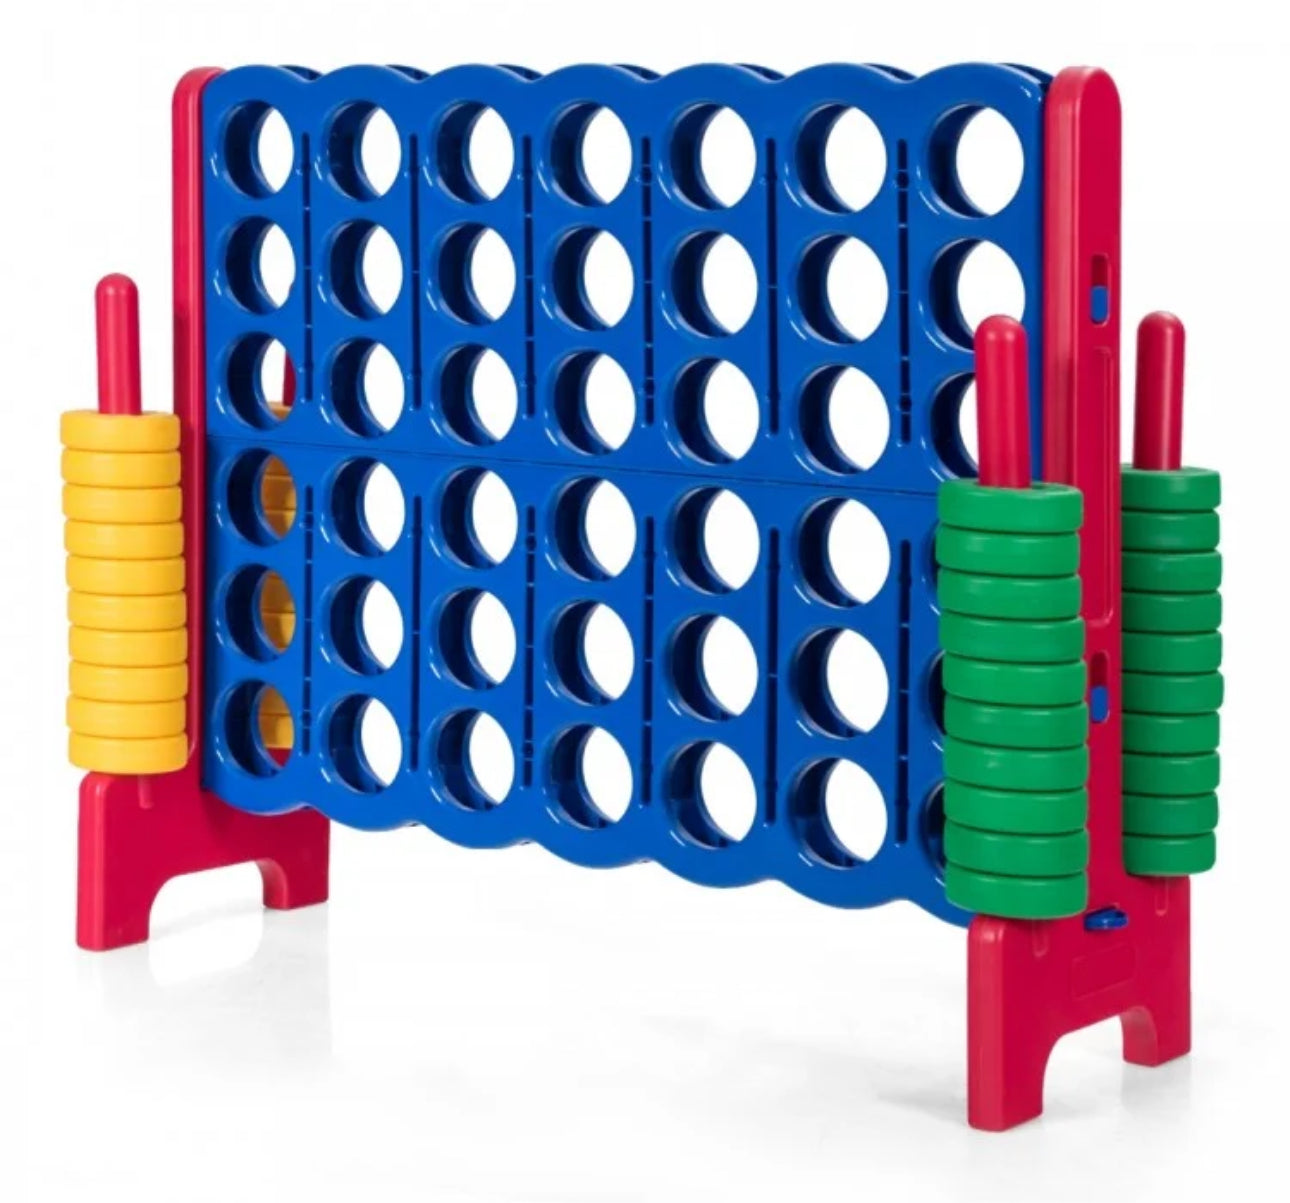 Super Cool Outdoor Fun Giant Connect 4 Style Jumbo 4-To-Score Game Set With 42 Giant Rings | Quick Release Slider | For The Whole Family | Indoor | Outdoor